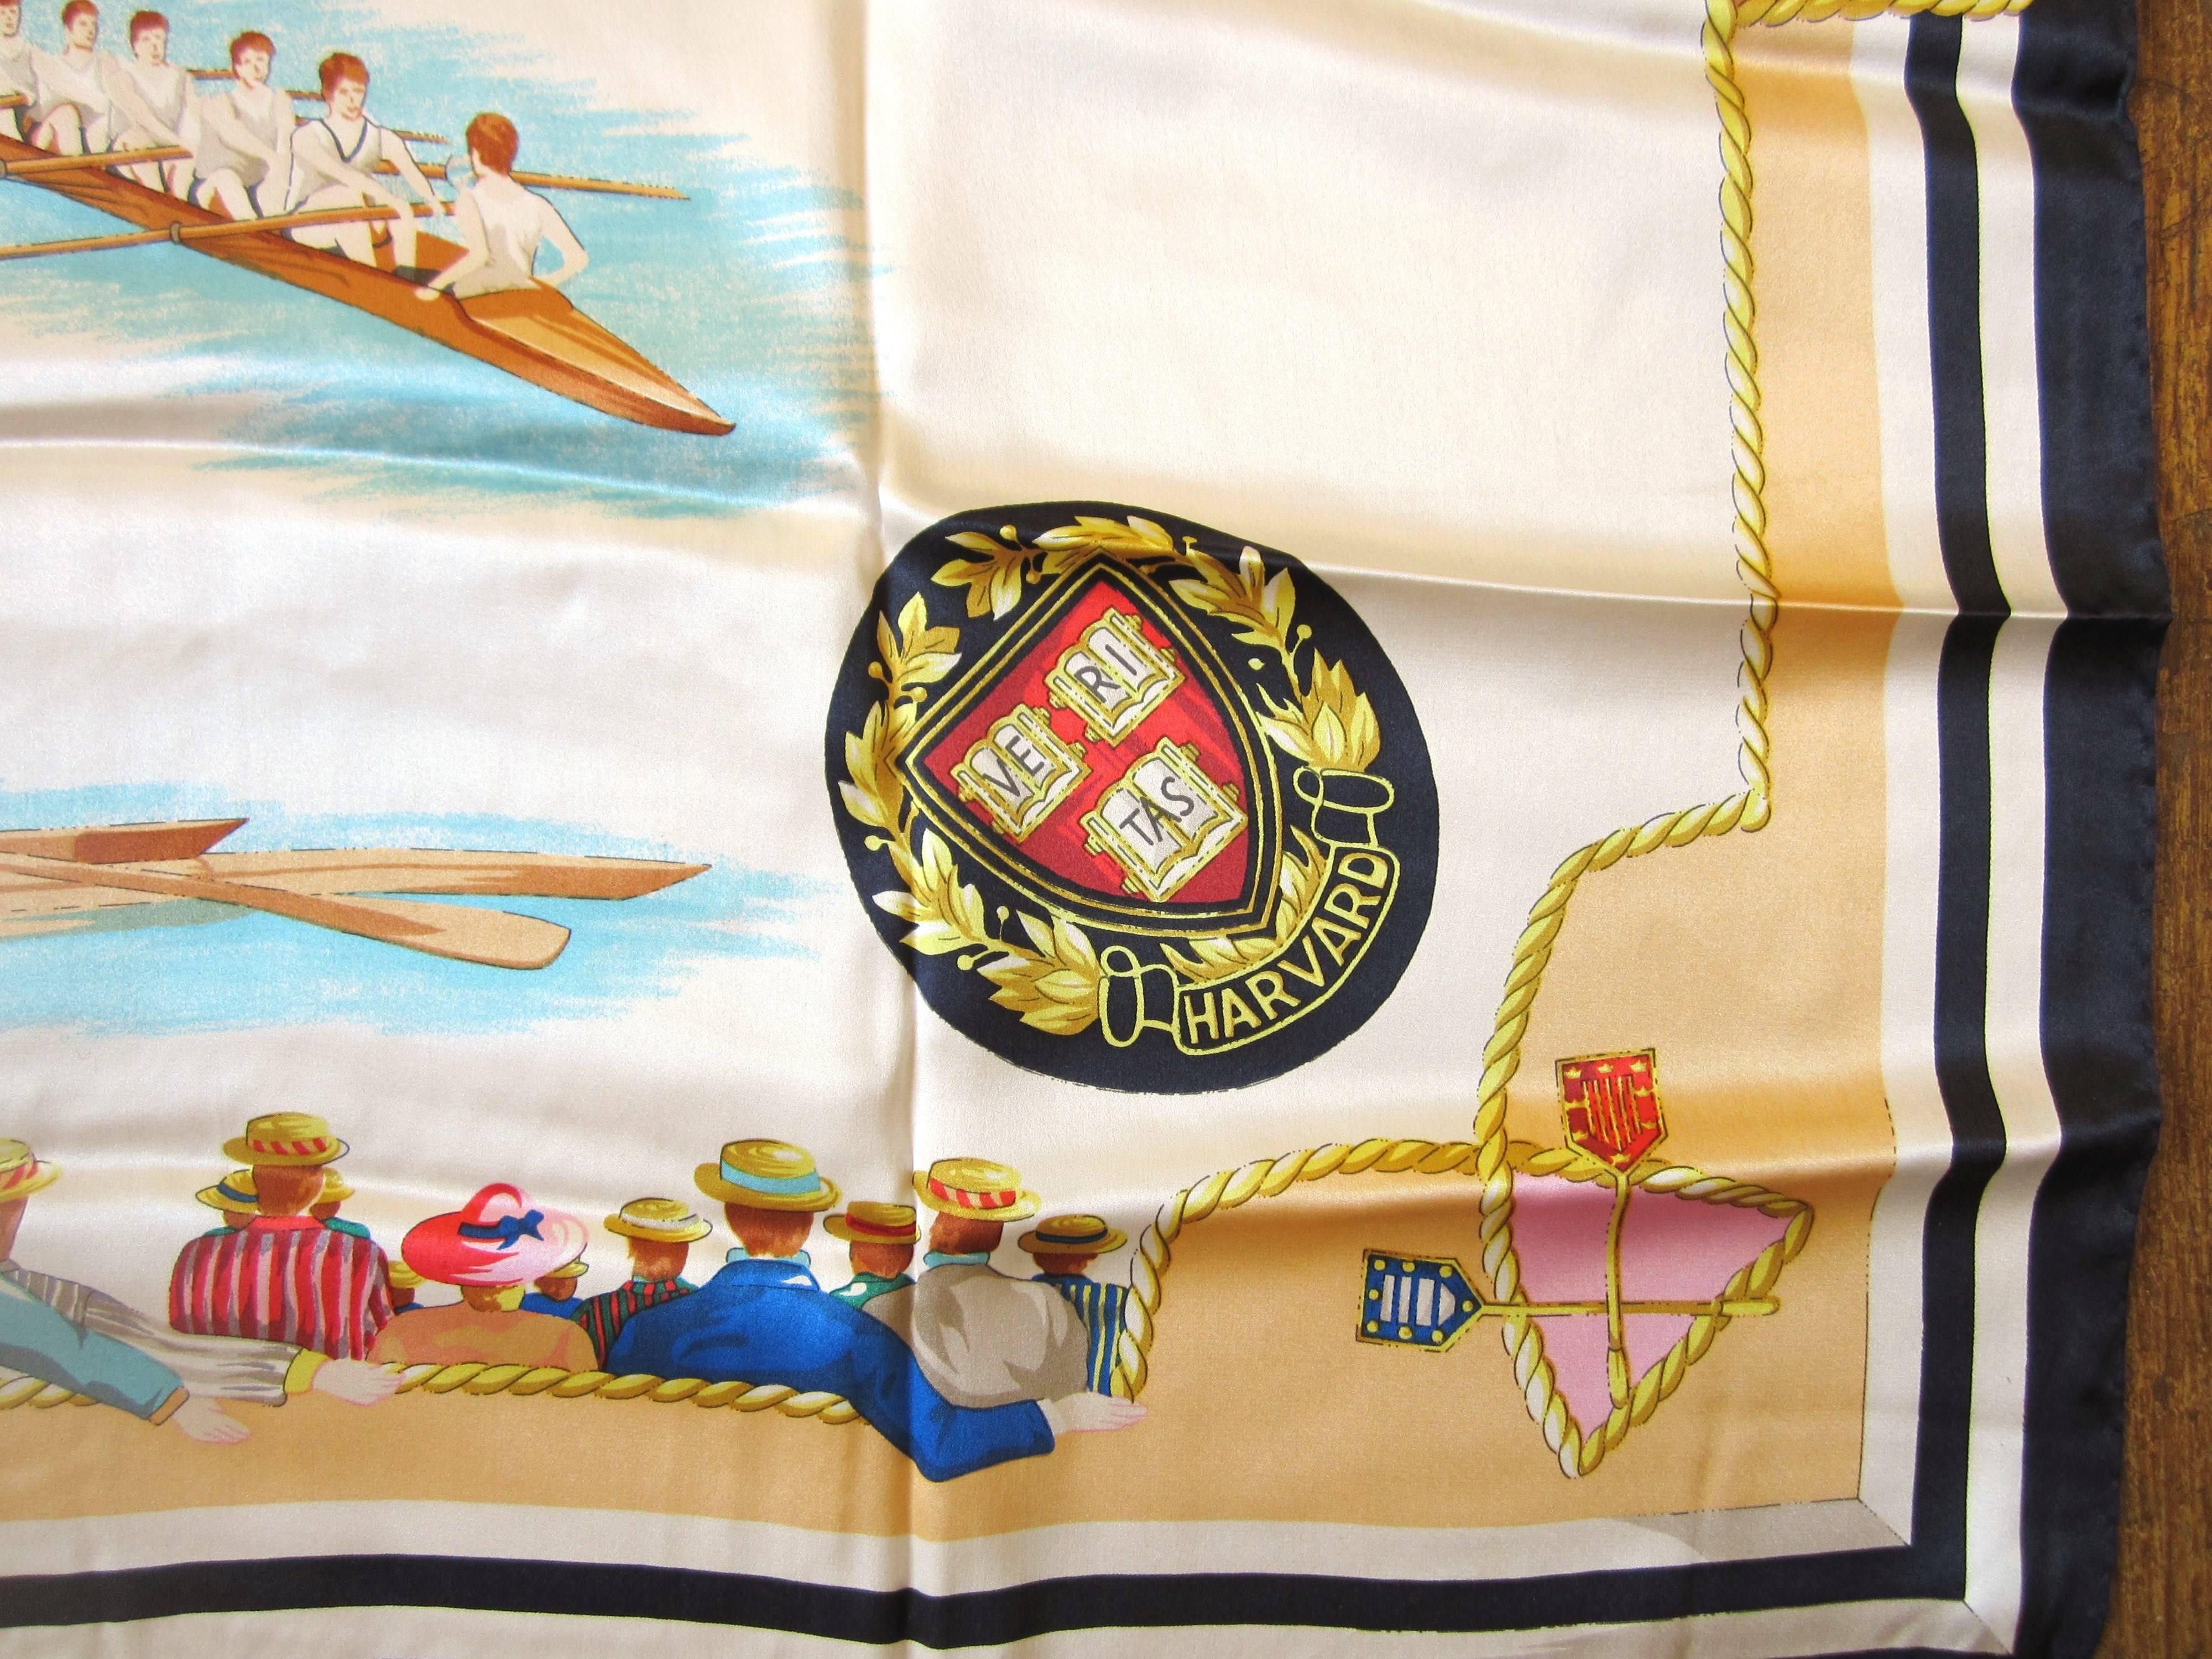 This is from a Vast Collection of Scarves that have never been worn from Escada. 34in x 34in.  Featuring a rowing competition from Harvard dated May 30, 1912. Look at those Vibrant Colors. Made in Italy. Hand Rolled Silk. This is out of a massive